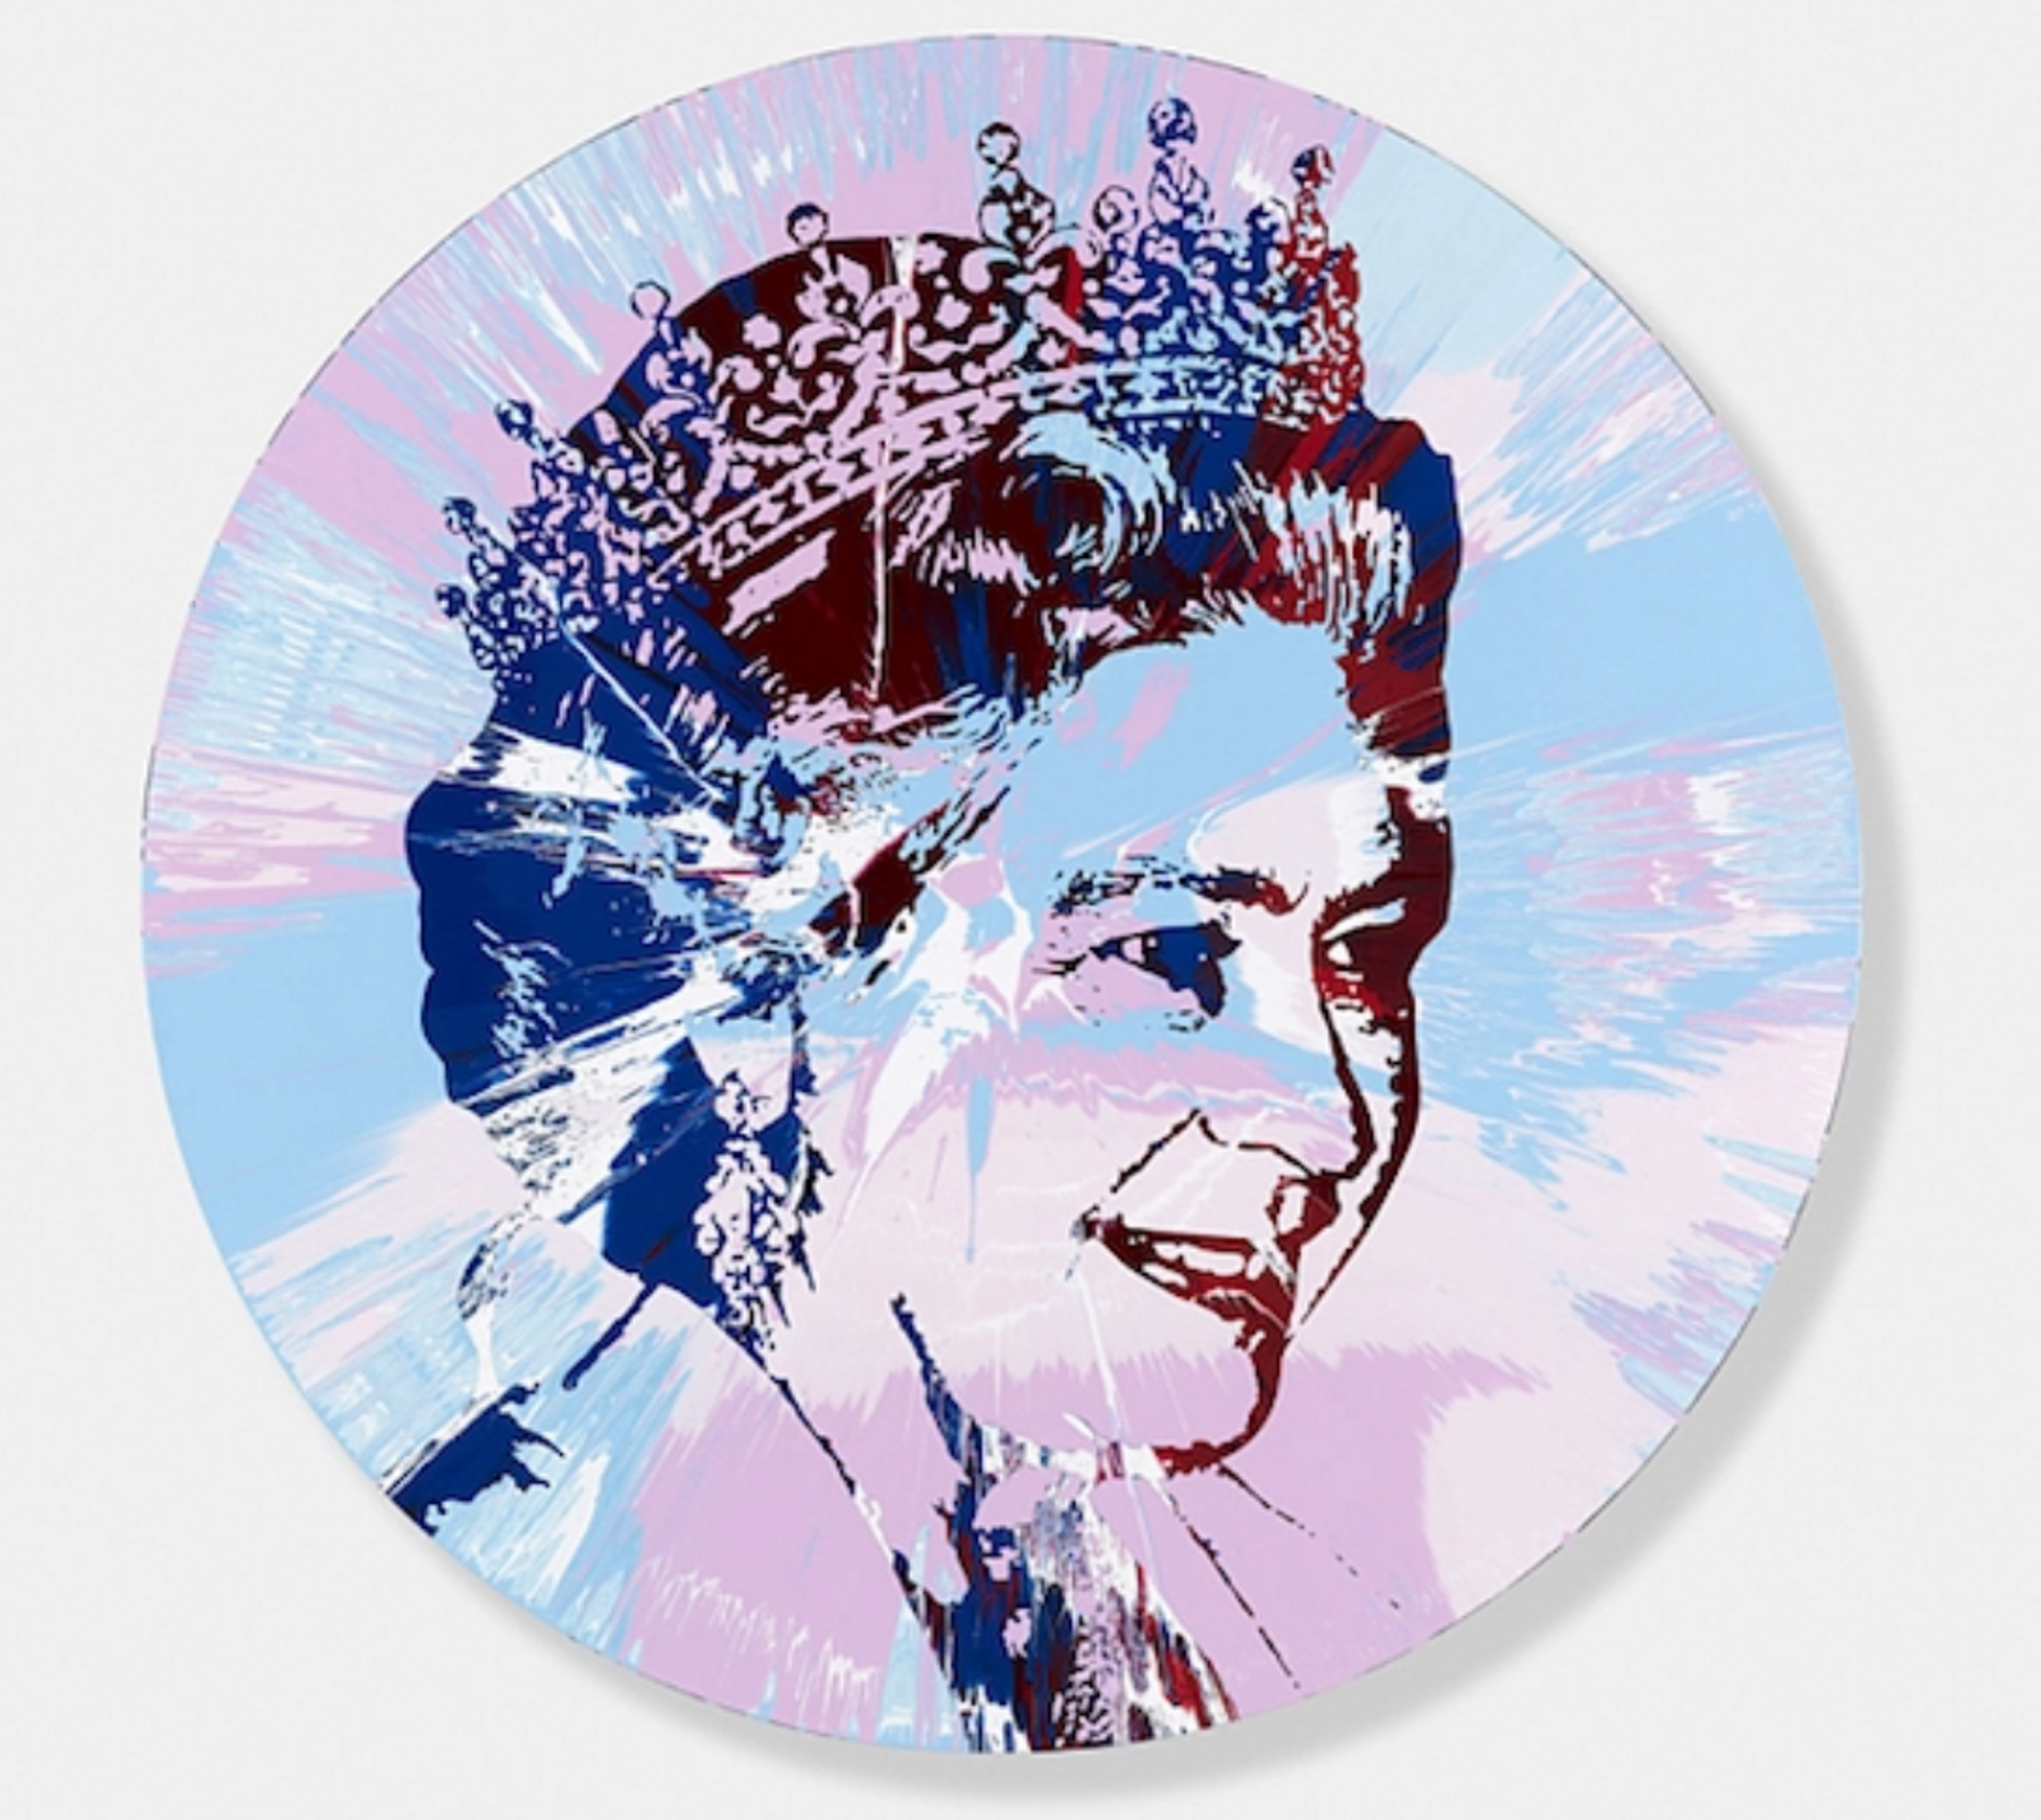 Beautiful Portrait, The Queen by Damien Hirst